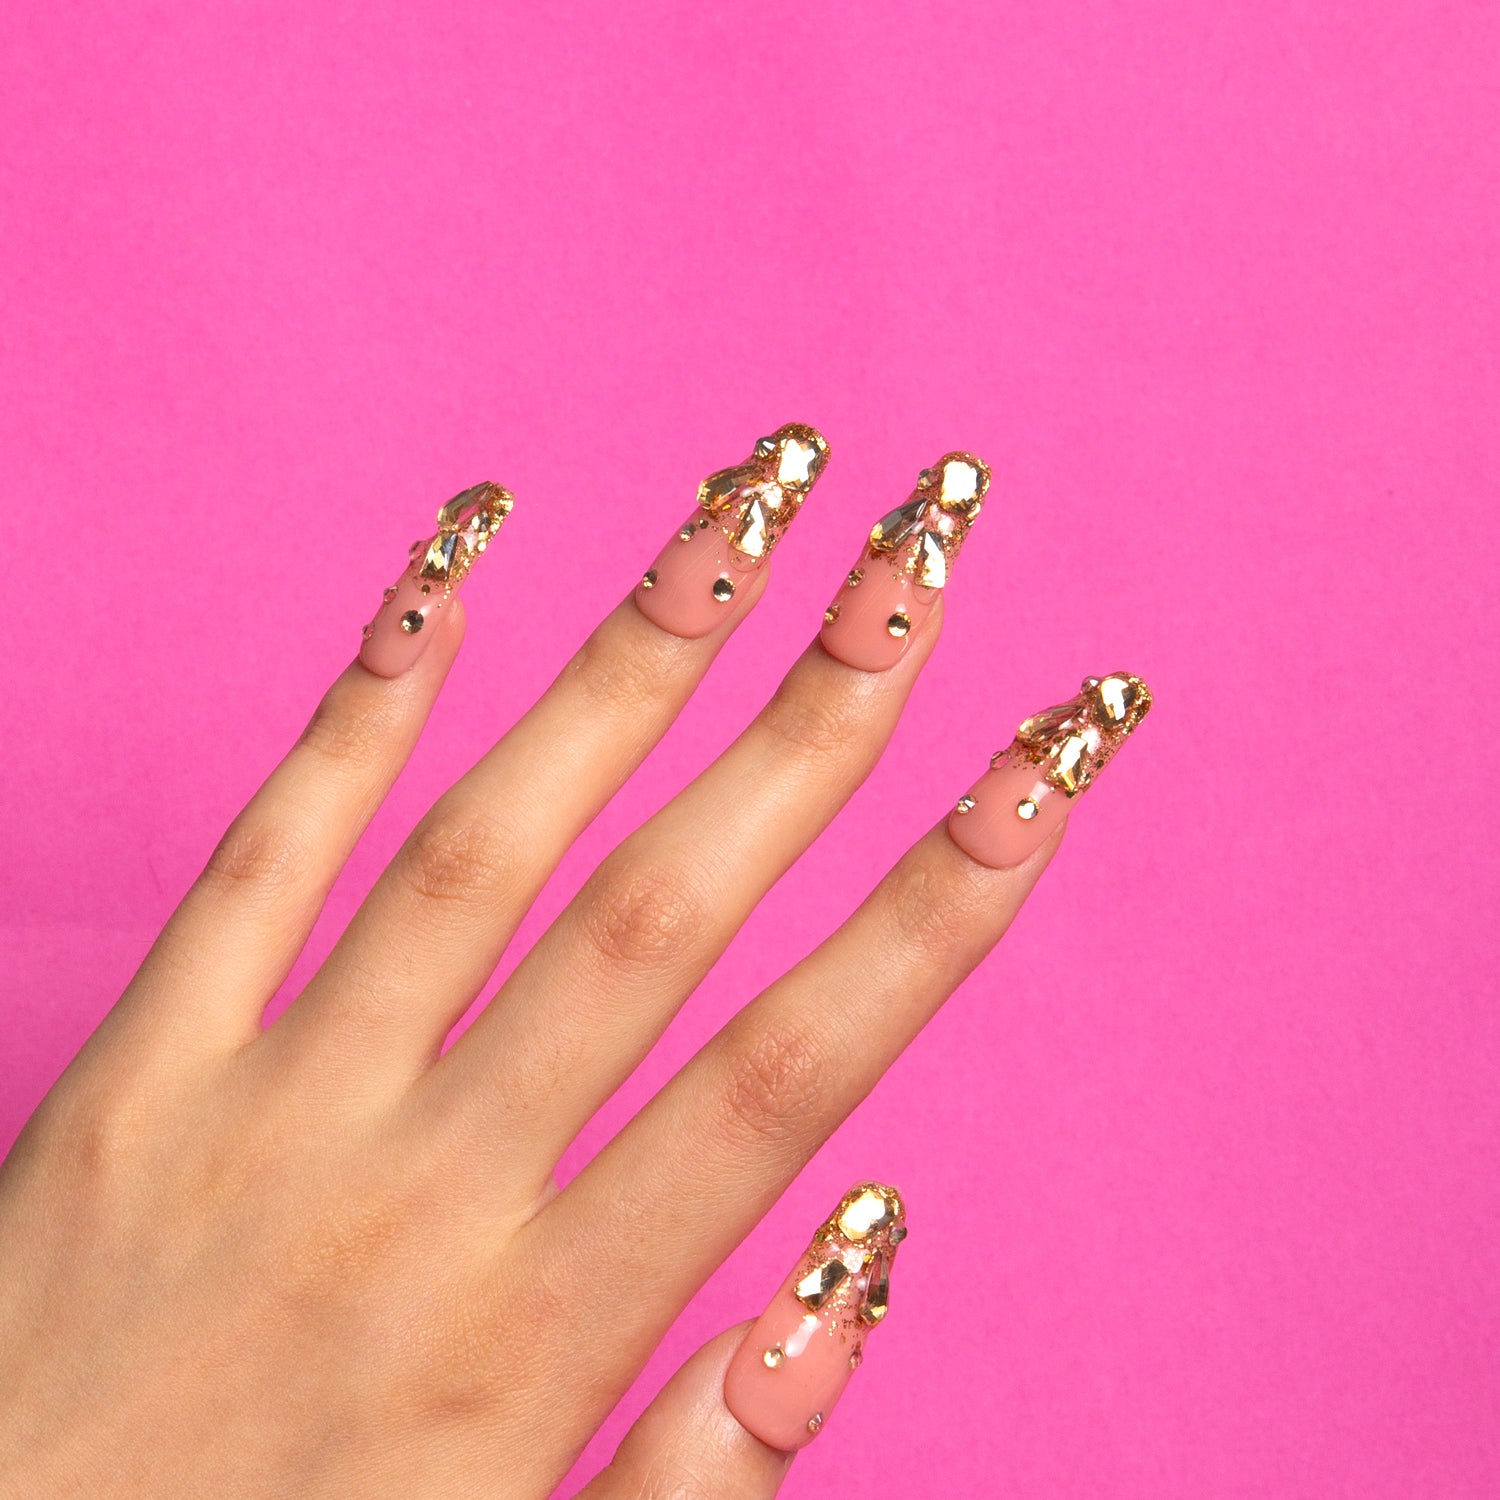 Stardust press-on nails become gilded works of art, like a sunrise over a royal residence.